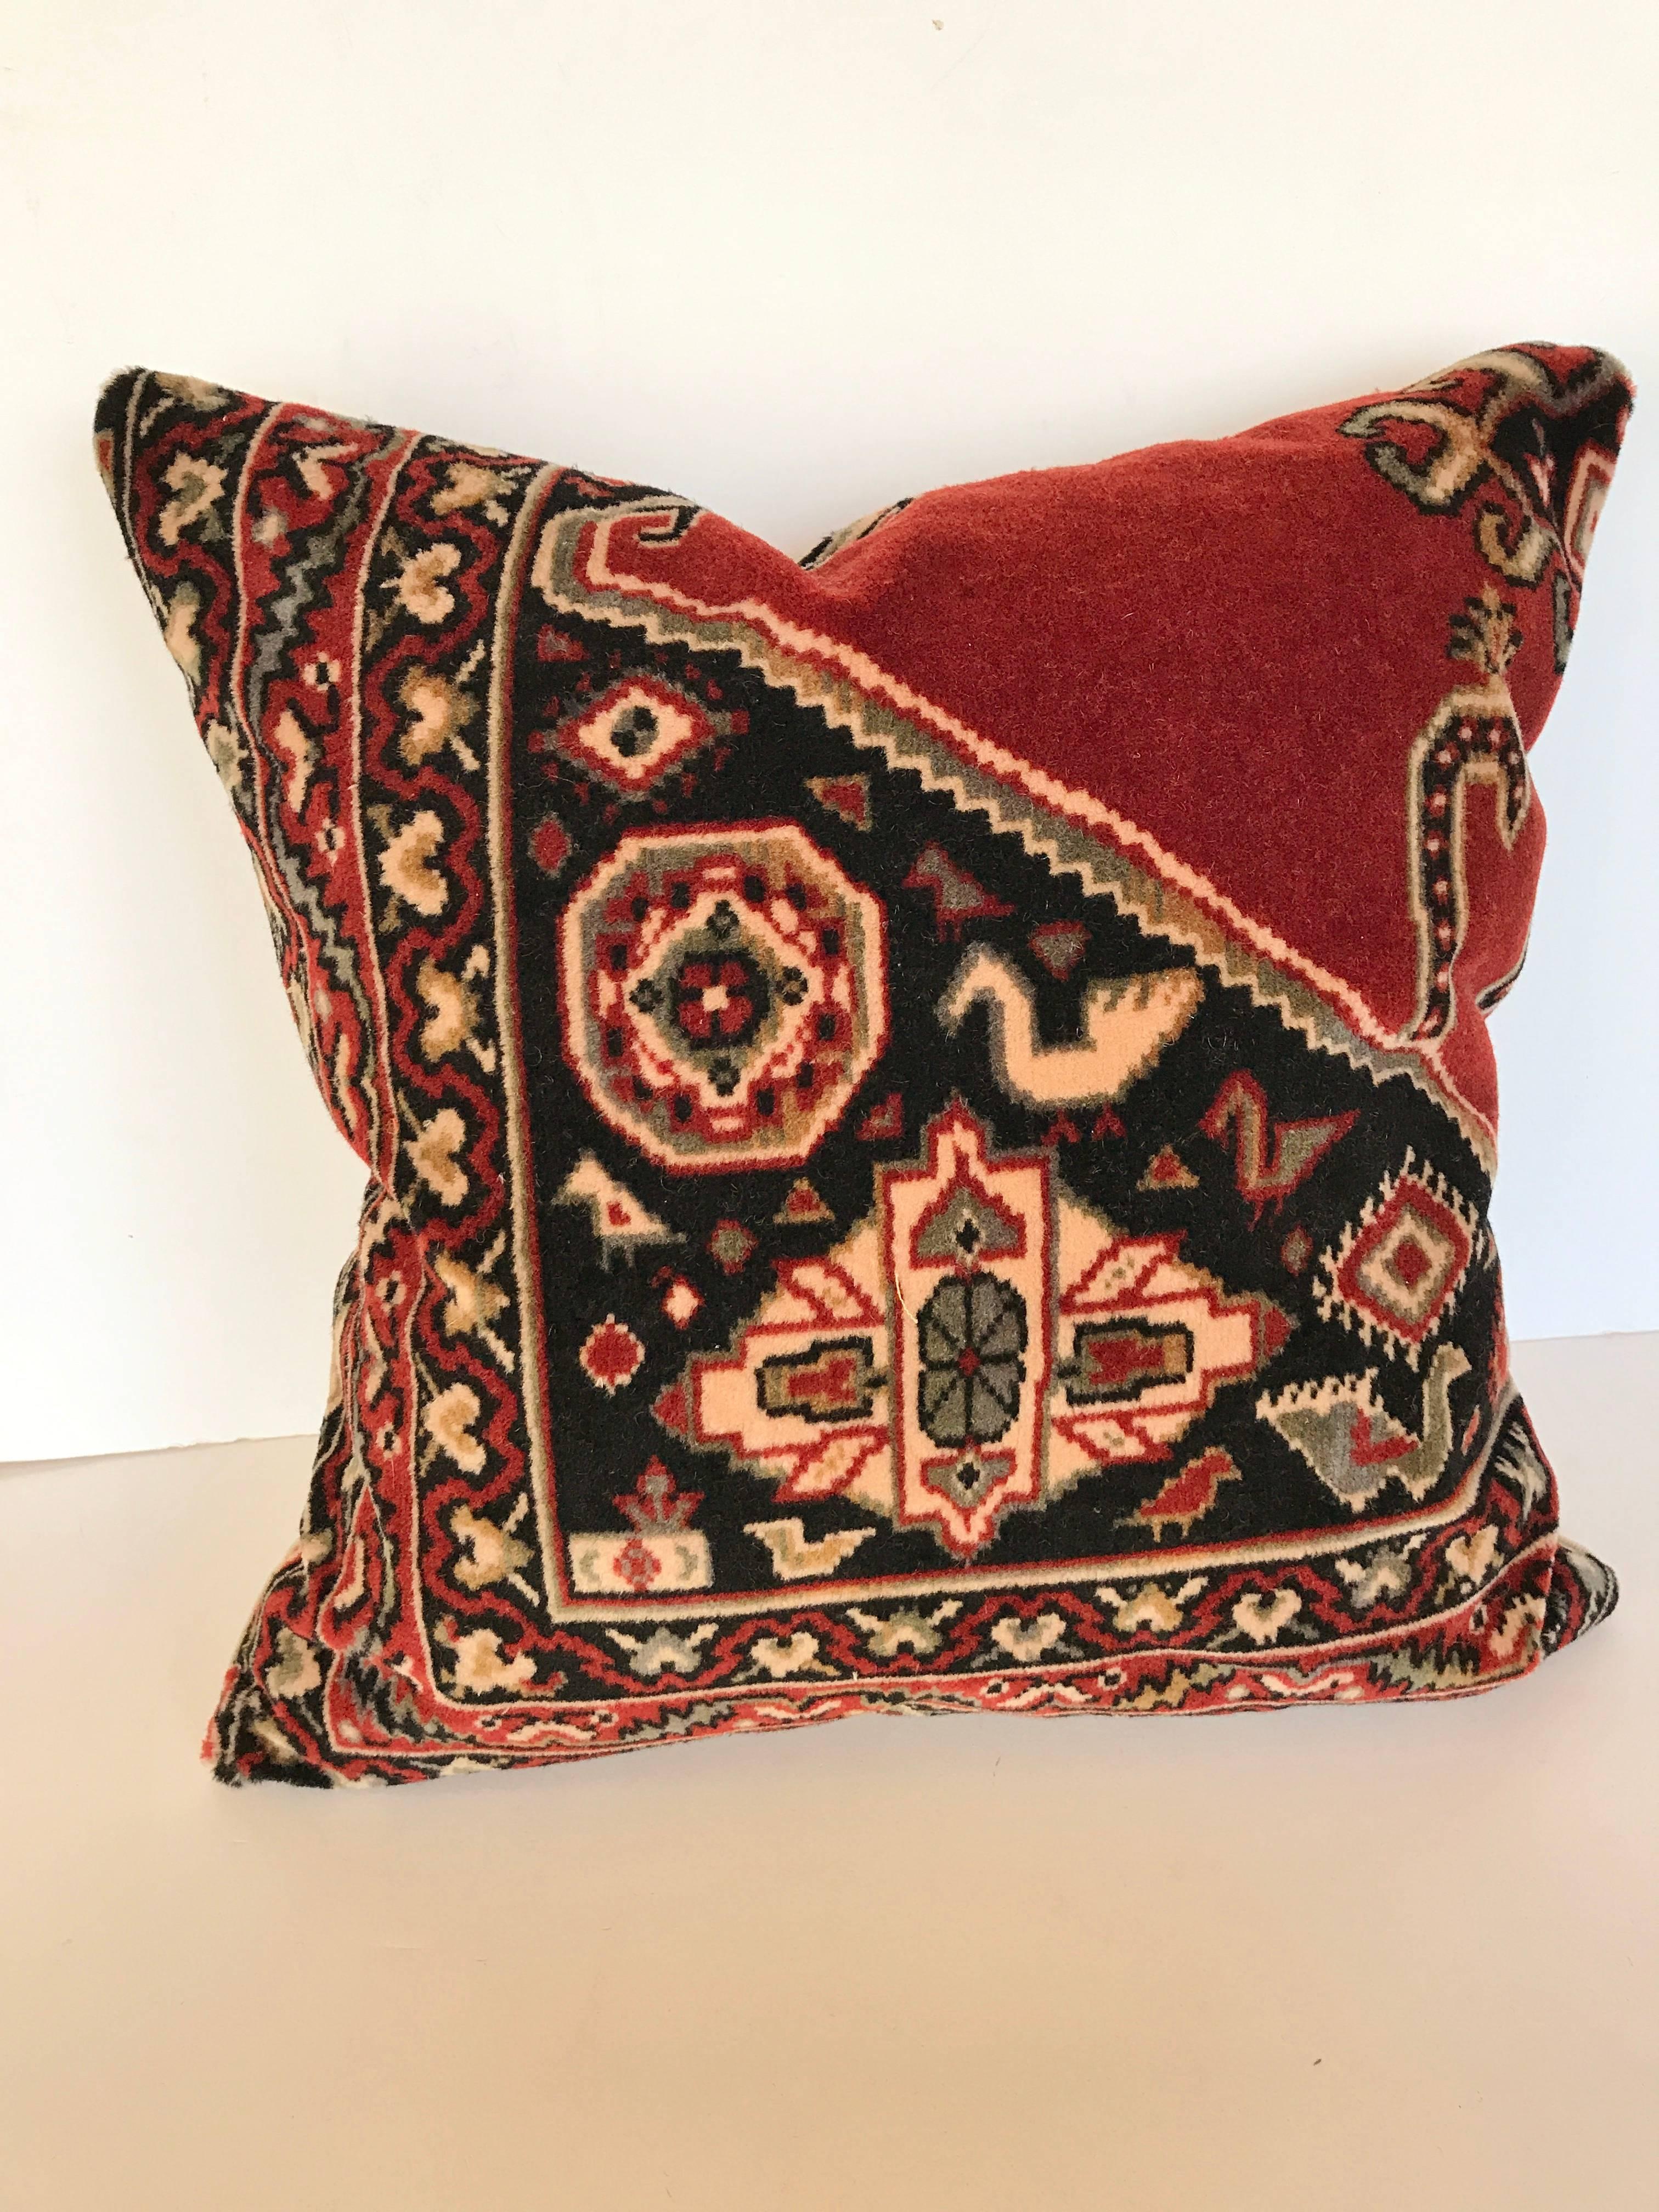 Custom pillows cut from a vintage wool mohair cloth from the Netherlands.  It has a soft hand and the pattern resembles an oriental rug.  The textile was used over the dining table during the winter months and covered with a white linen cloth while